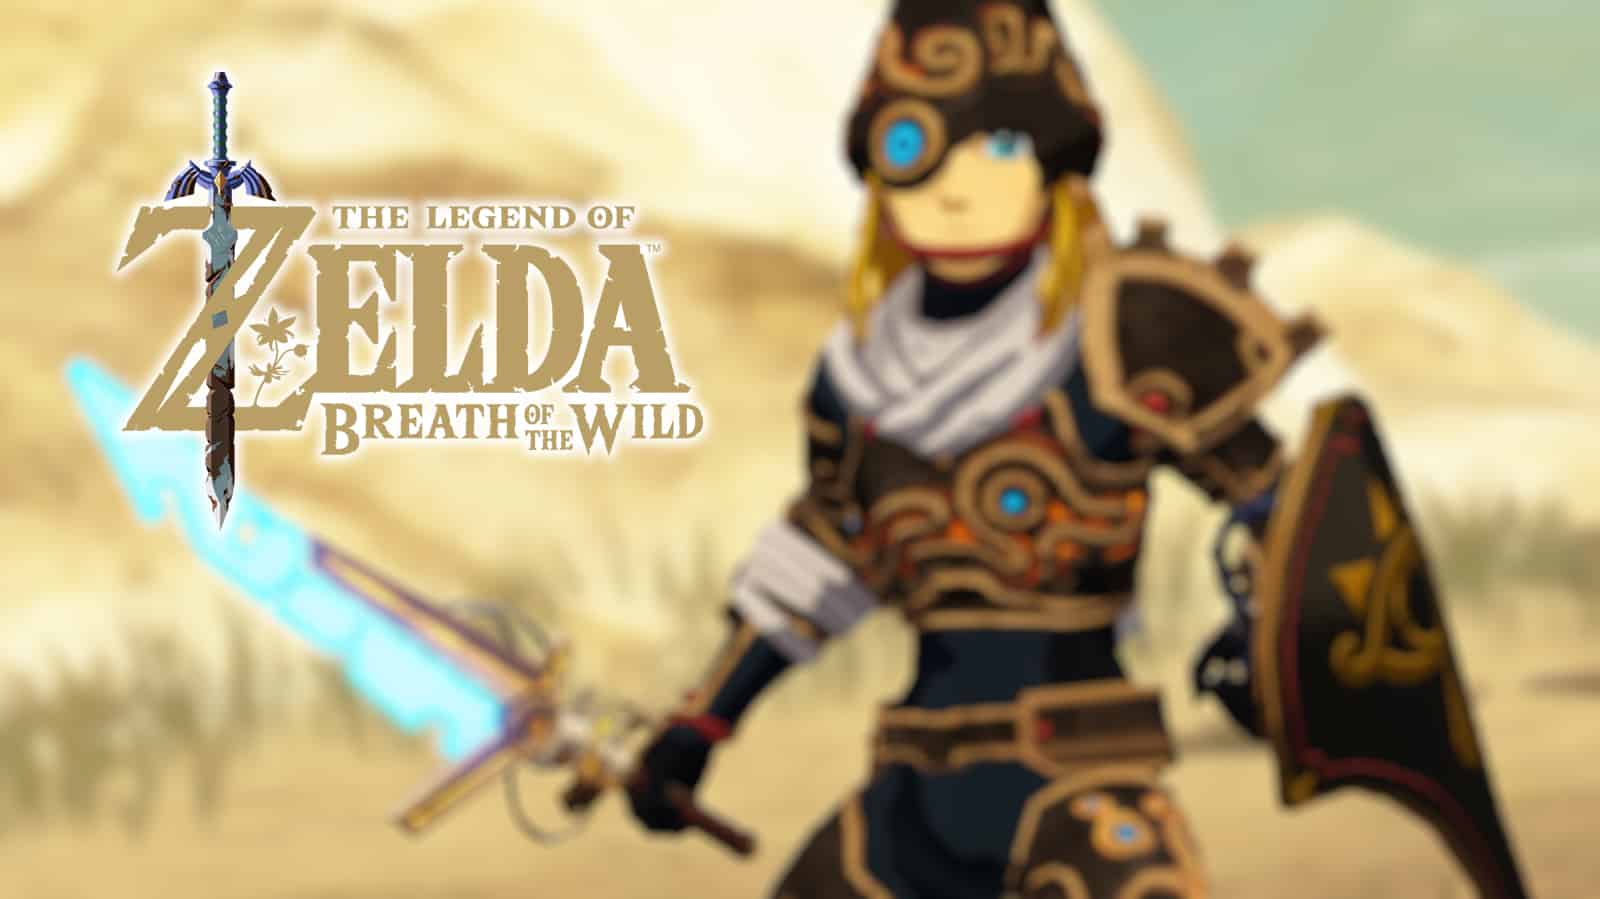 A screenshot of the Ancient Armor in BOTW with the game logo